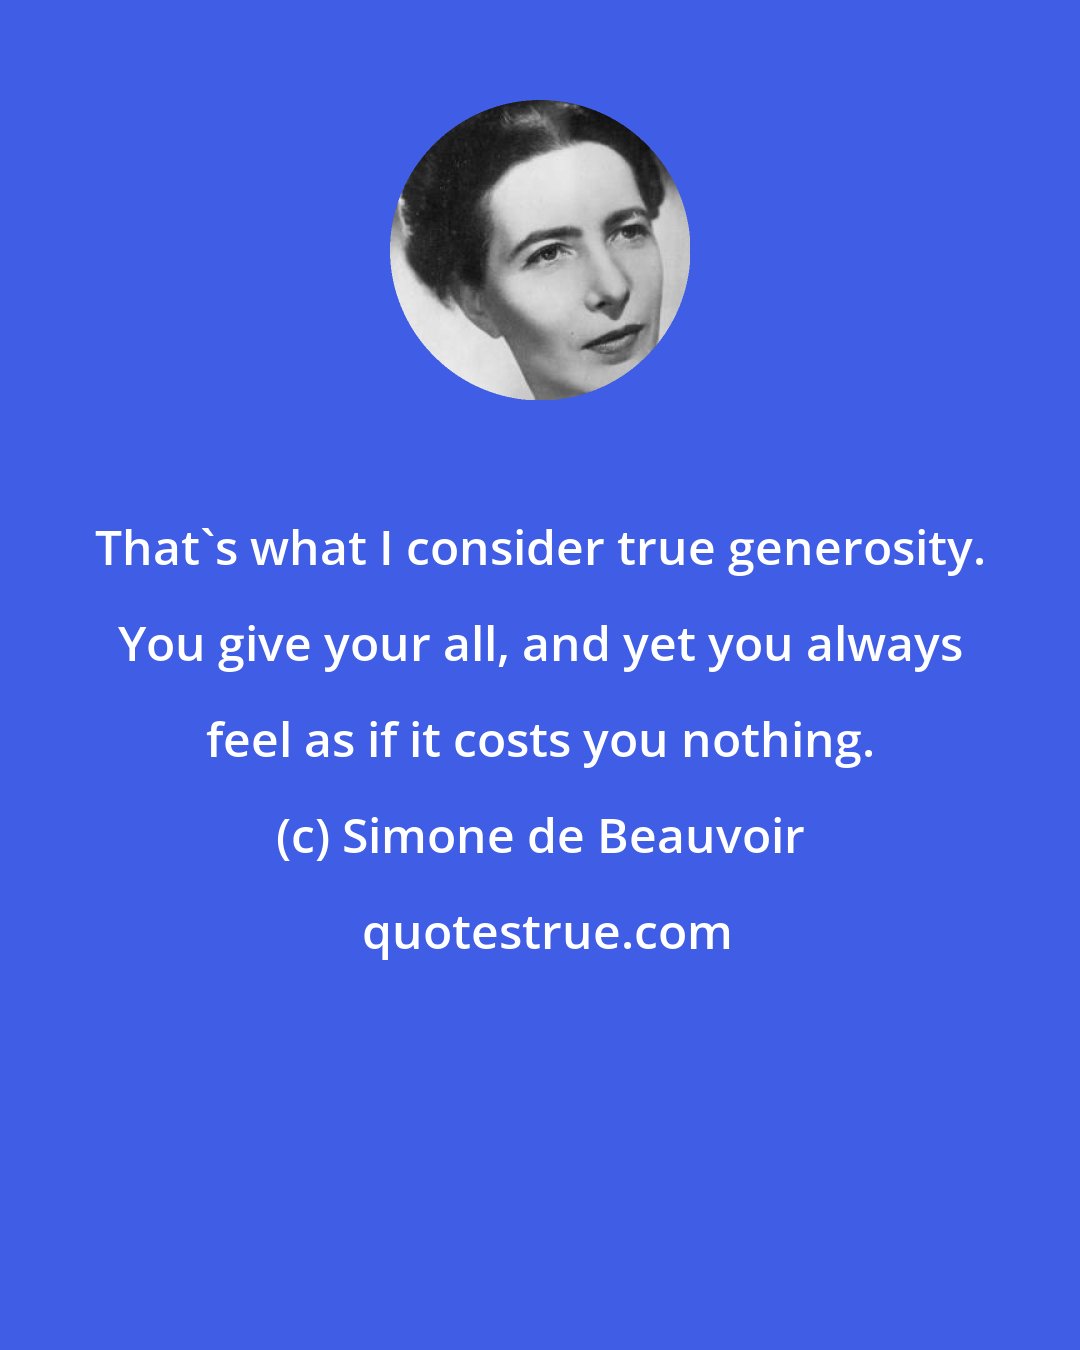 Simone de Beauvoir: That's what I consider true generosity. You give your all, and yet you always feel as if it costs you nothing.